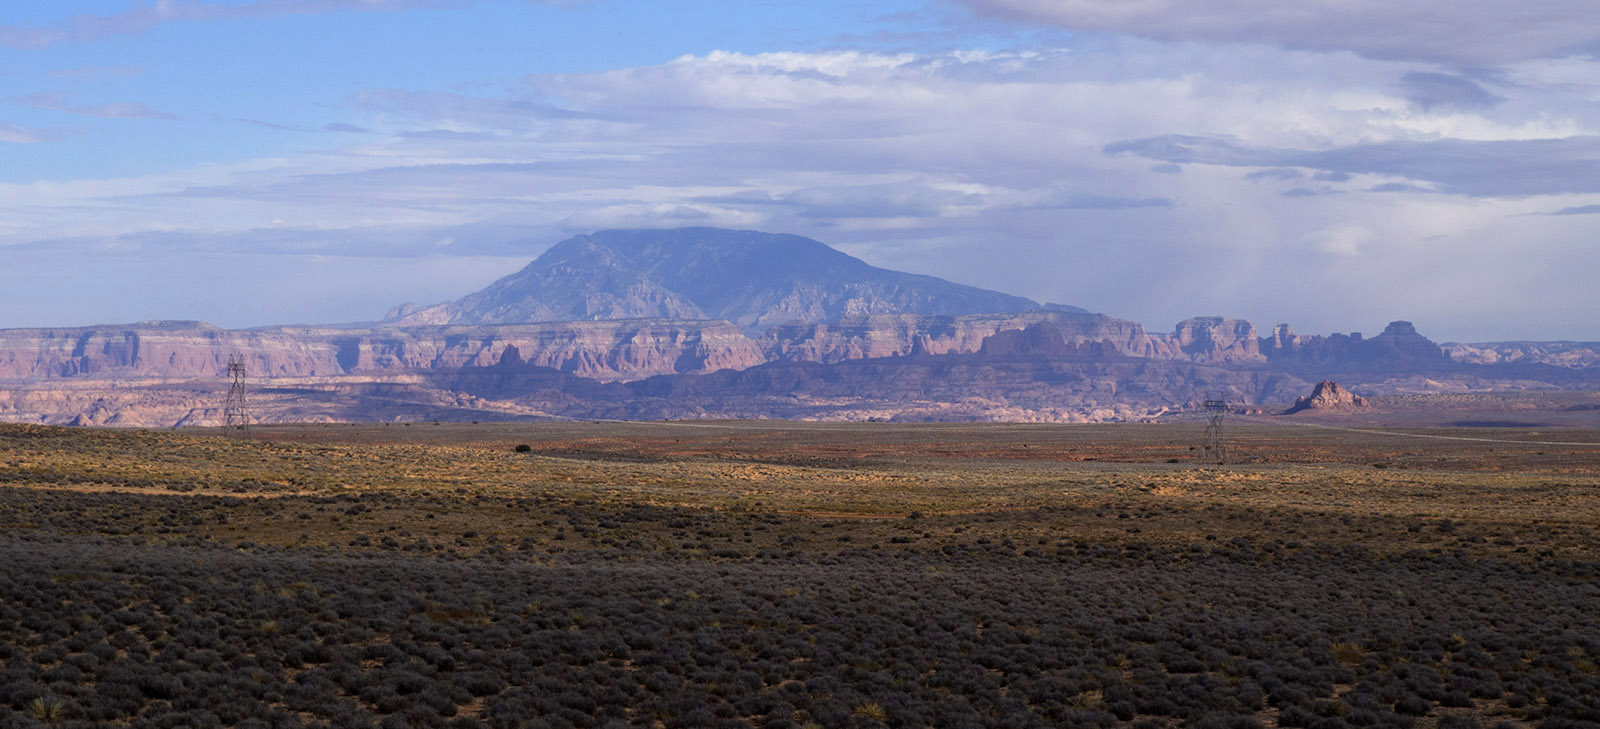 Scenery along Arizona Highway 98, looking Northeast to Navajo Mountain (10,300 ft) which is formed by an intrusive mound of igneous rock (laccolith) into covering and surrounding sedimentary layers.